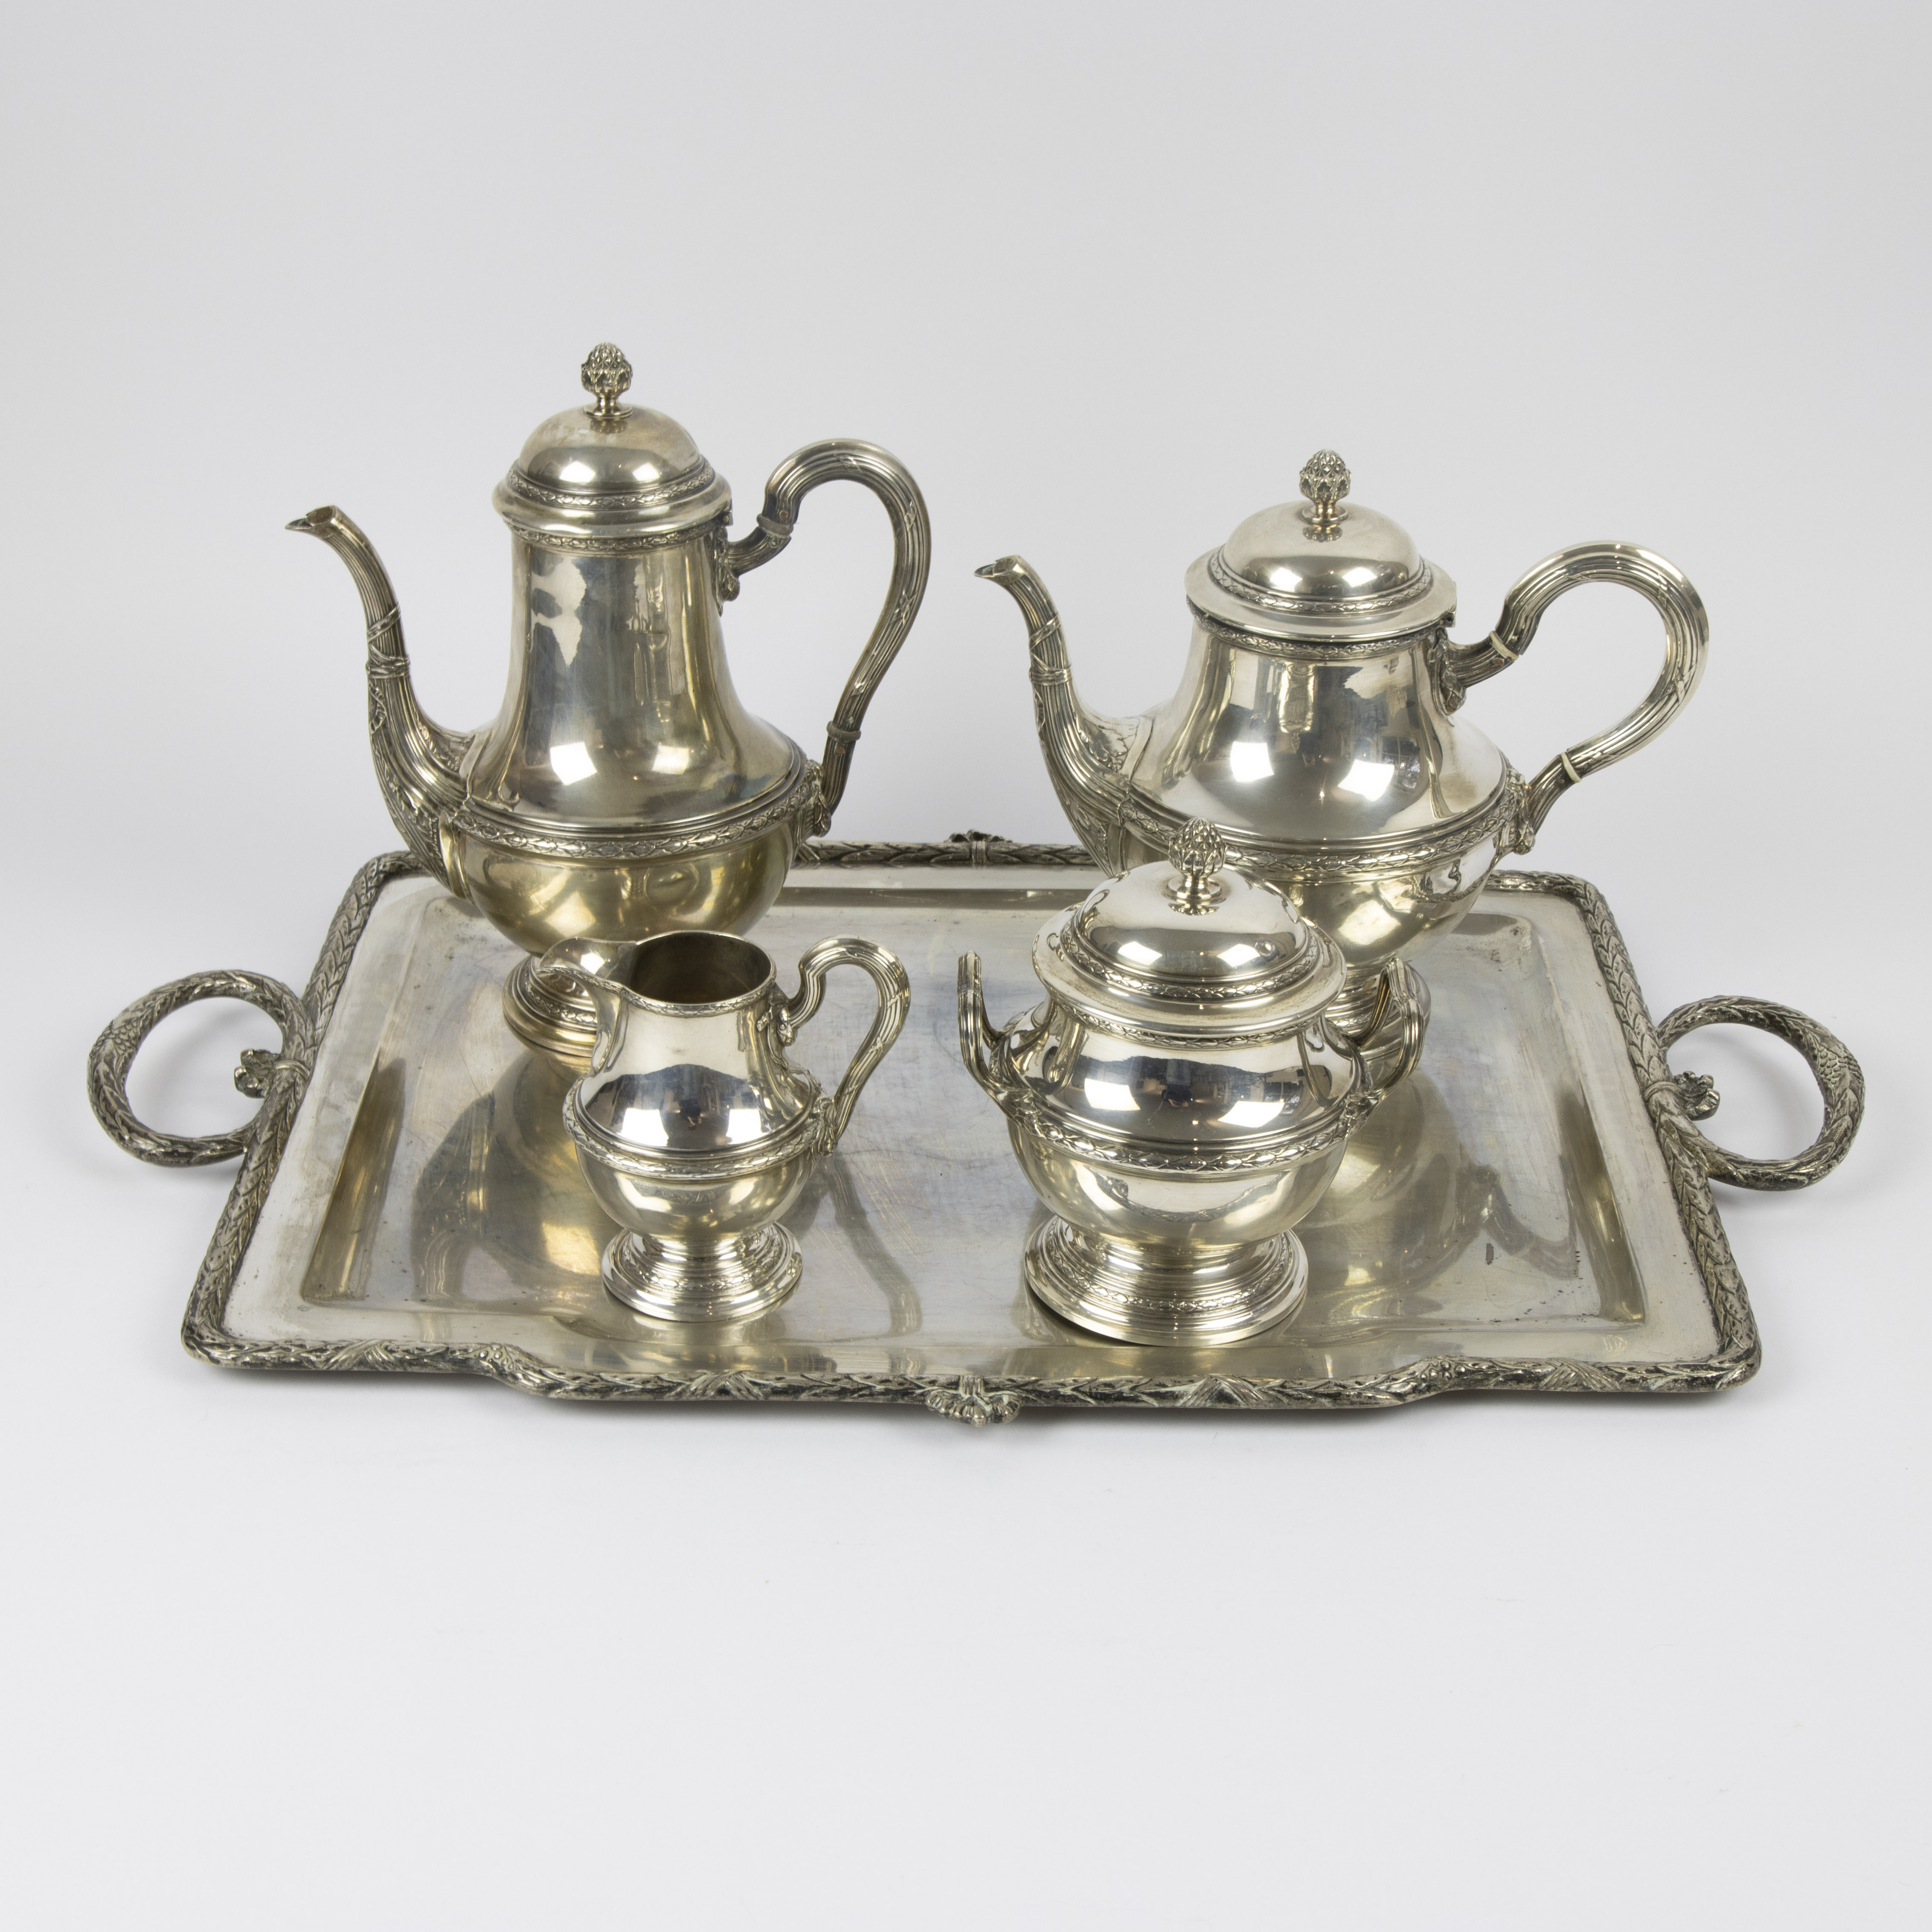 4 piece silver coffee and tea set with Louis XVI style plateau.